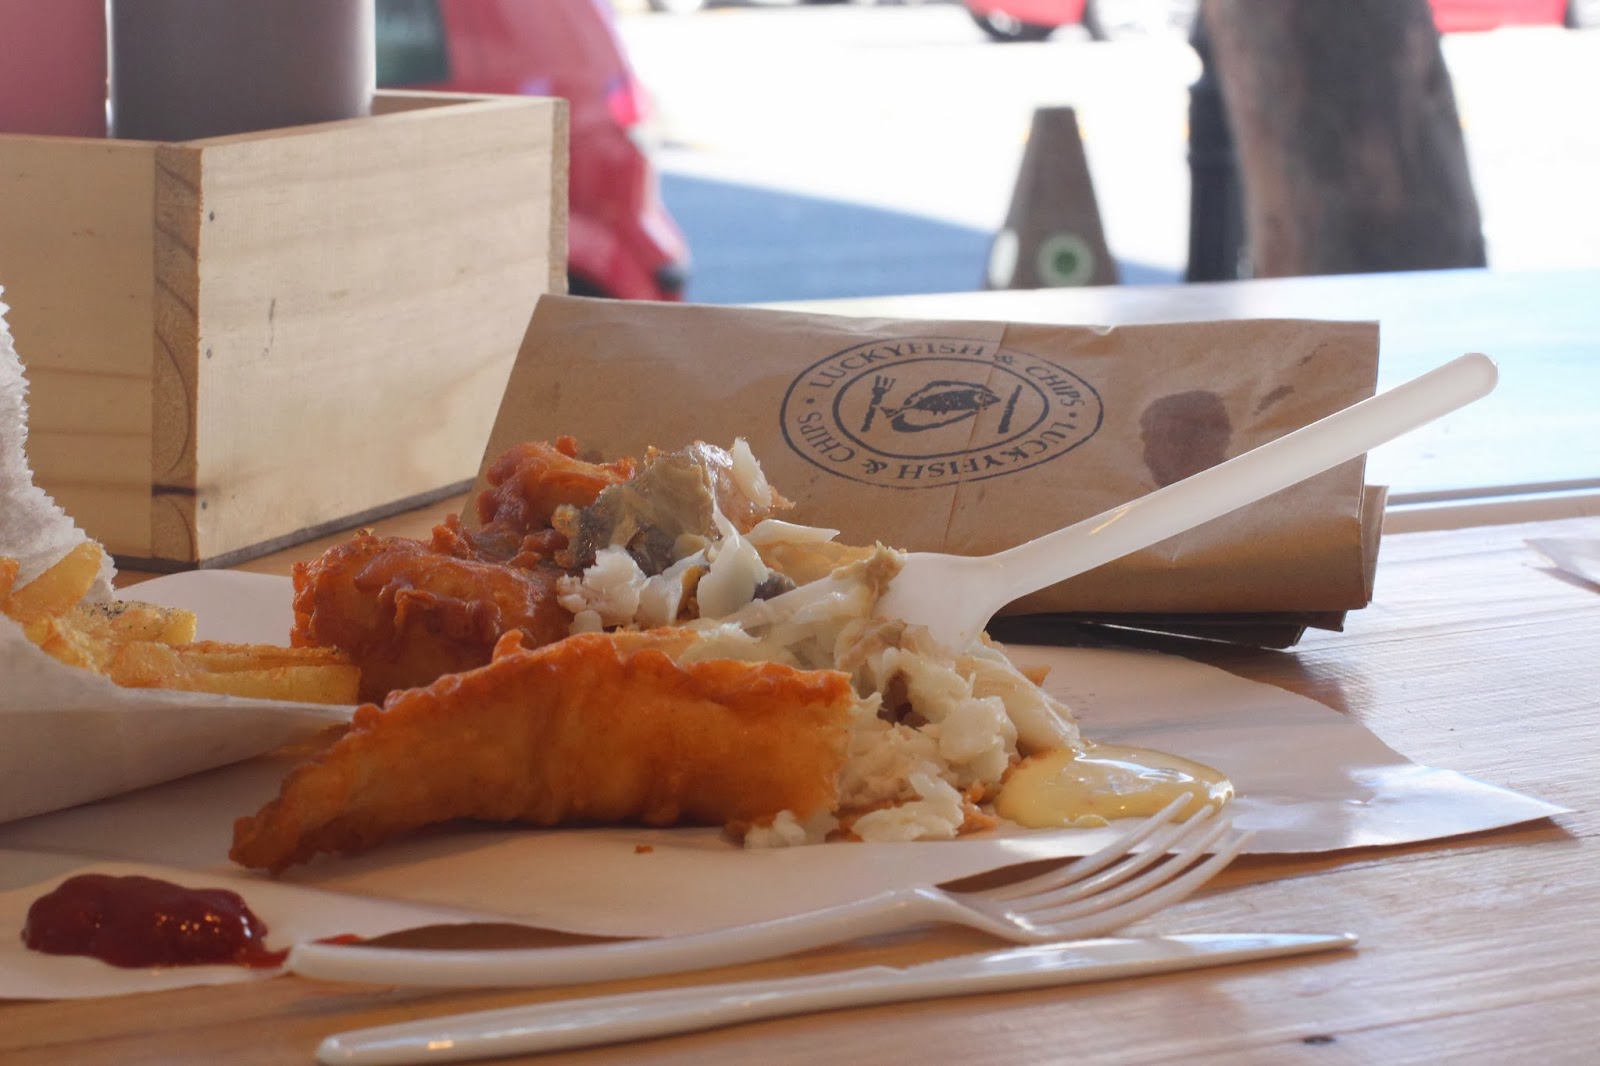 CAPE TOWN DIVA: Fish and Chips in the City...